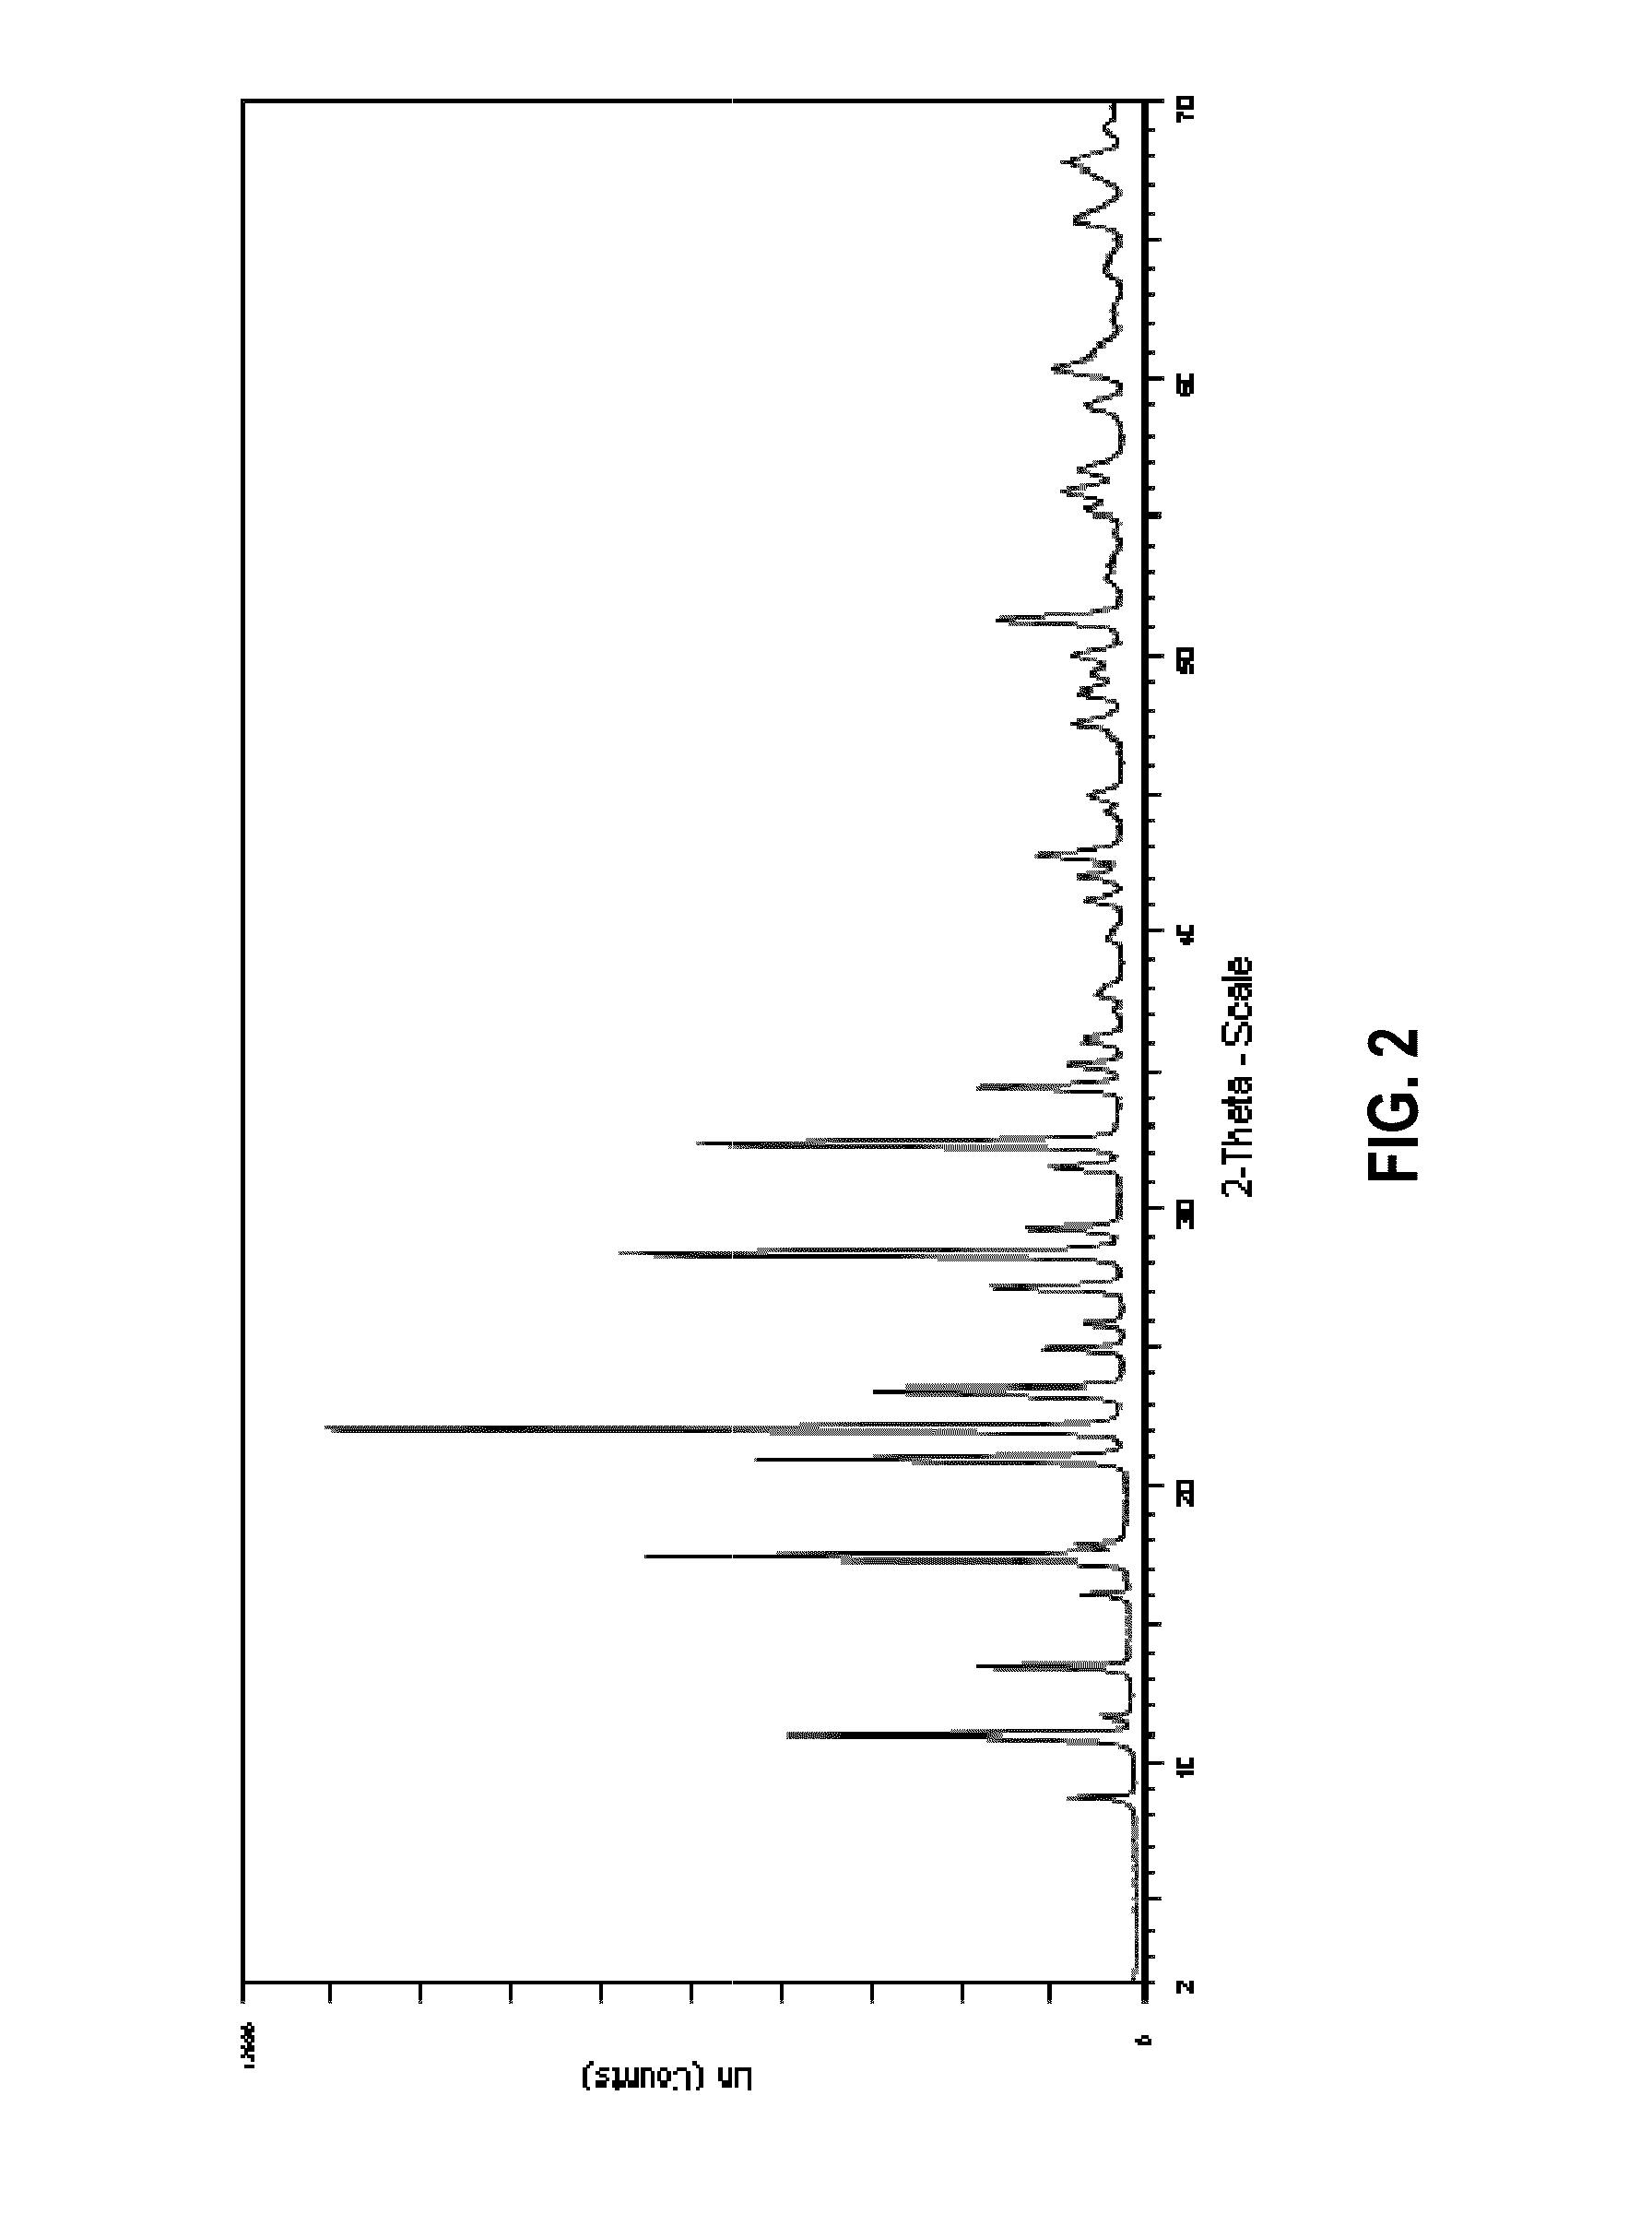 Synthesis of Zeolitic Materials using N,N-Dimethyl Organotemplates